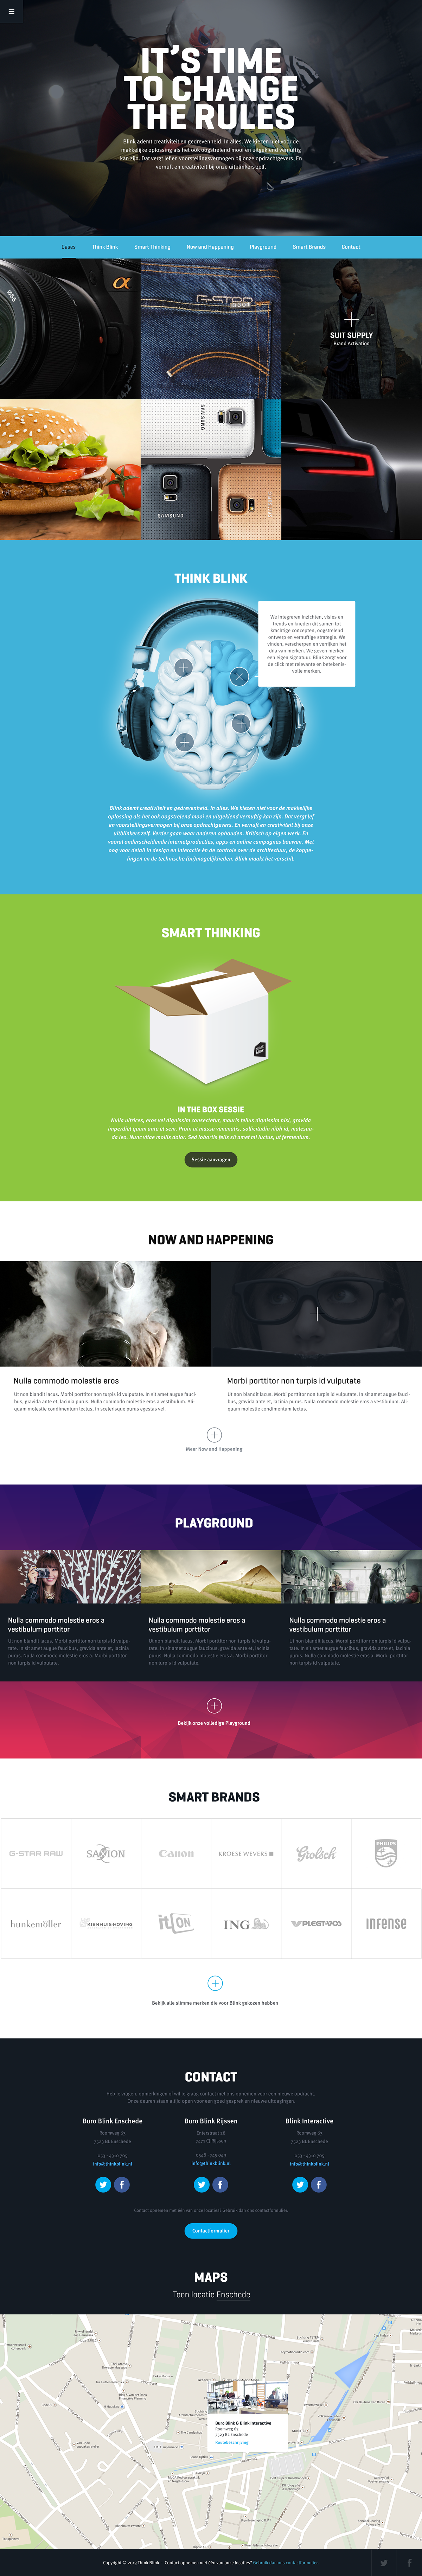 landing page creative blocks agency colorful